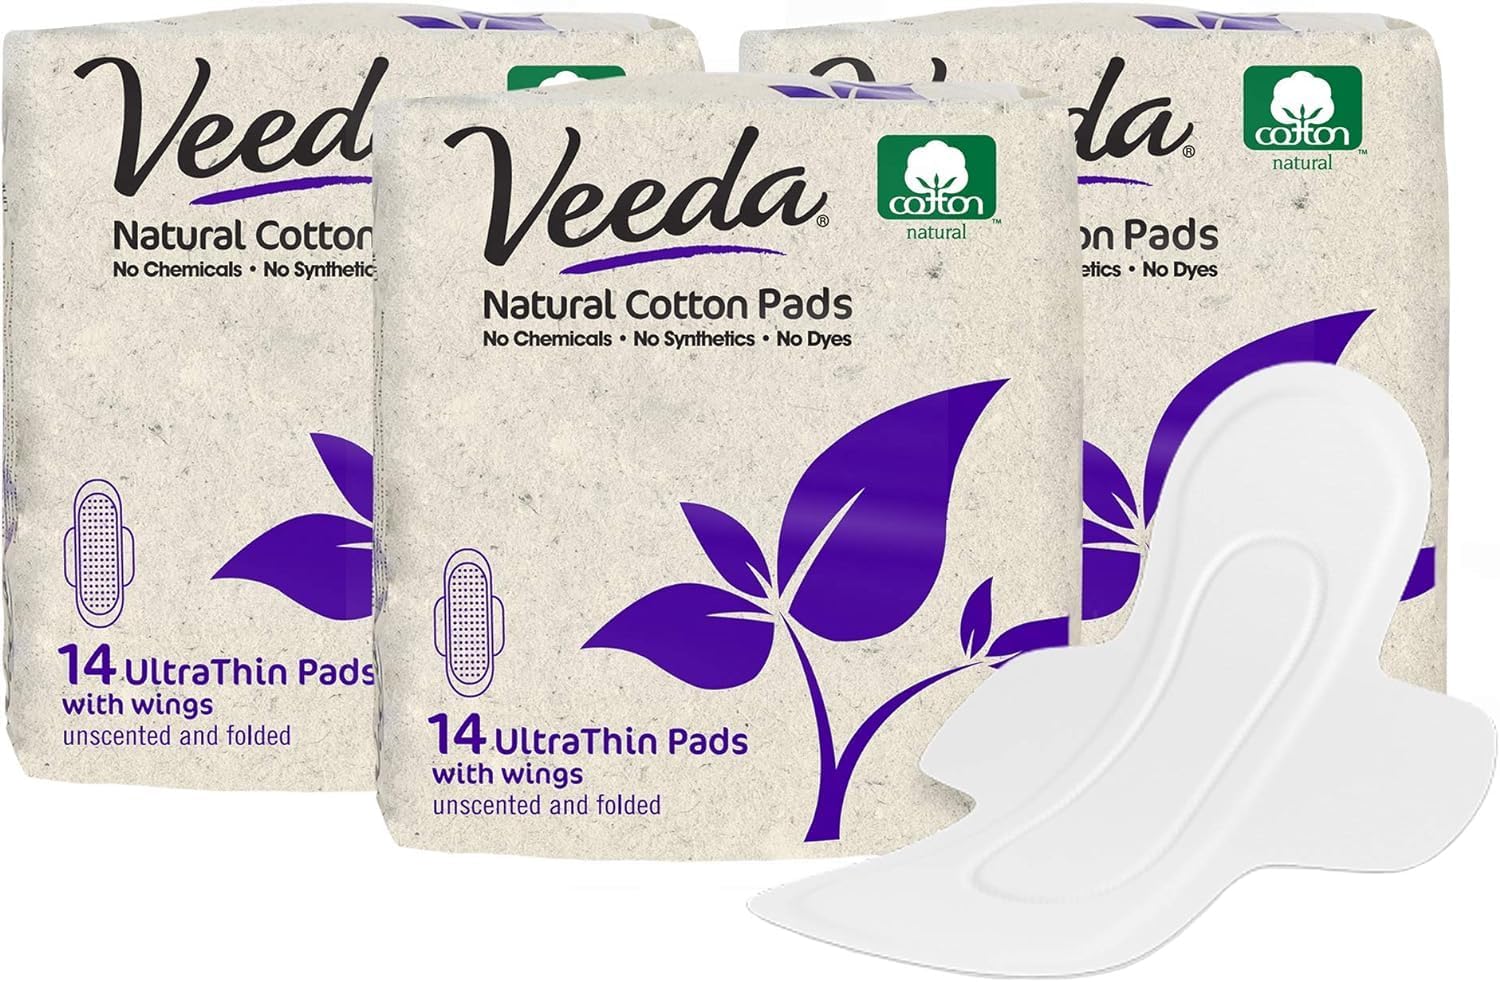 Veeda Natural Cotton Day Pads for Women, Hypoallergenic, Chlorine and Fragrance Free, Ultra-Thin pads with wings, Heavy Flow Absorbent, Sanitary Napkins, 42 Count (3 Packs of 14)